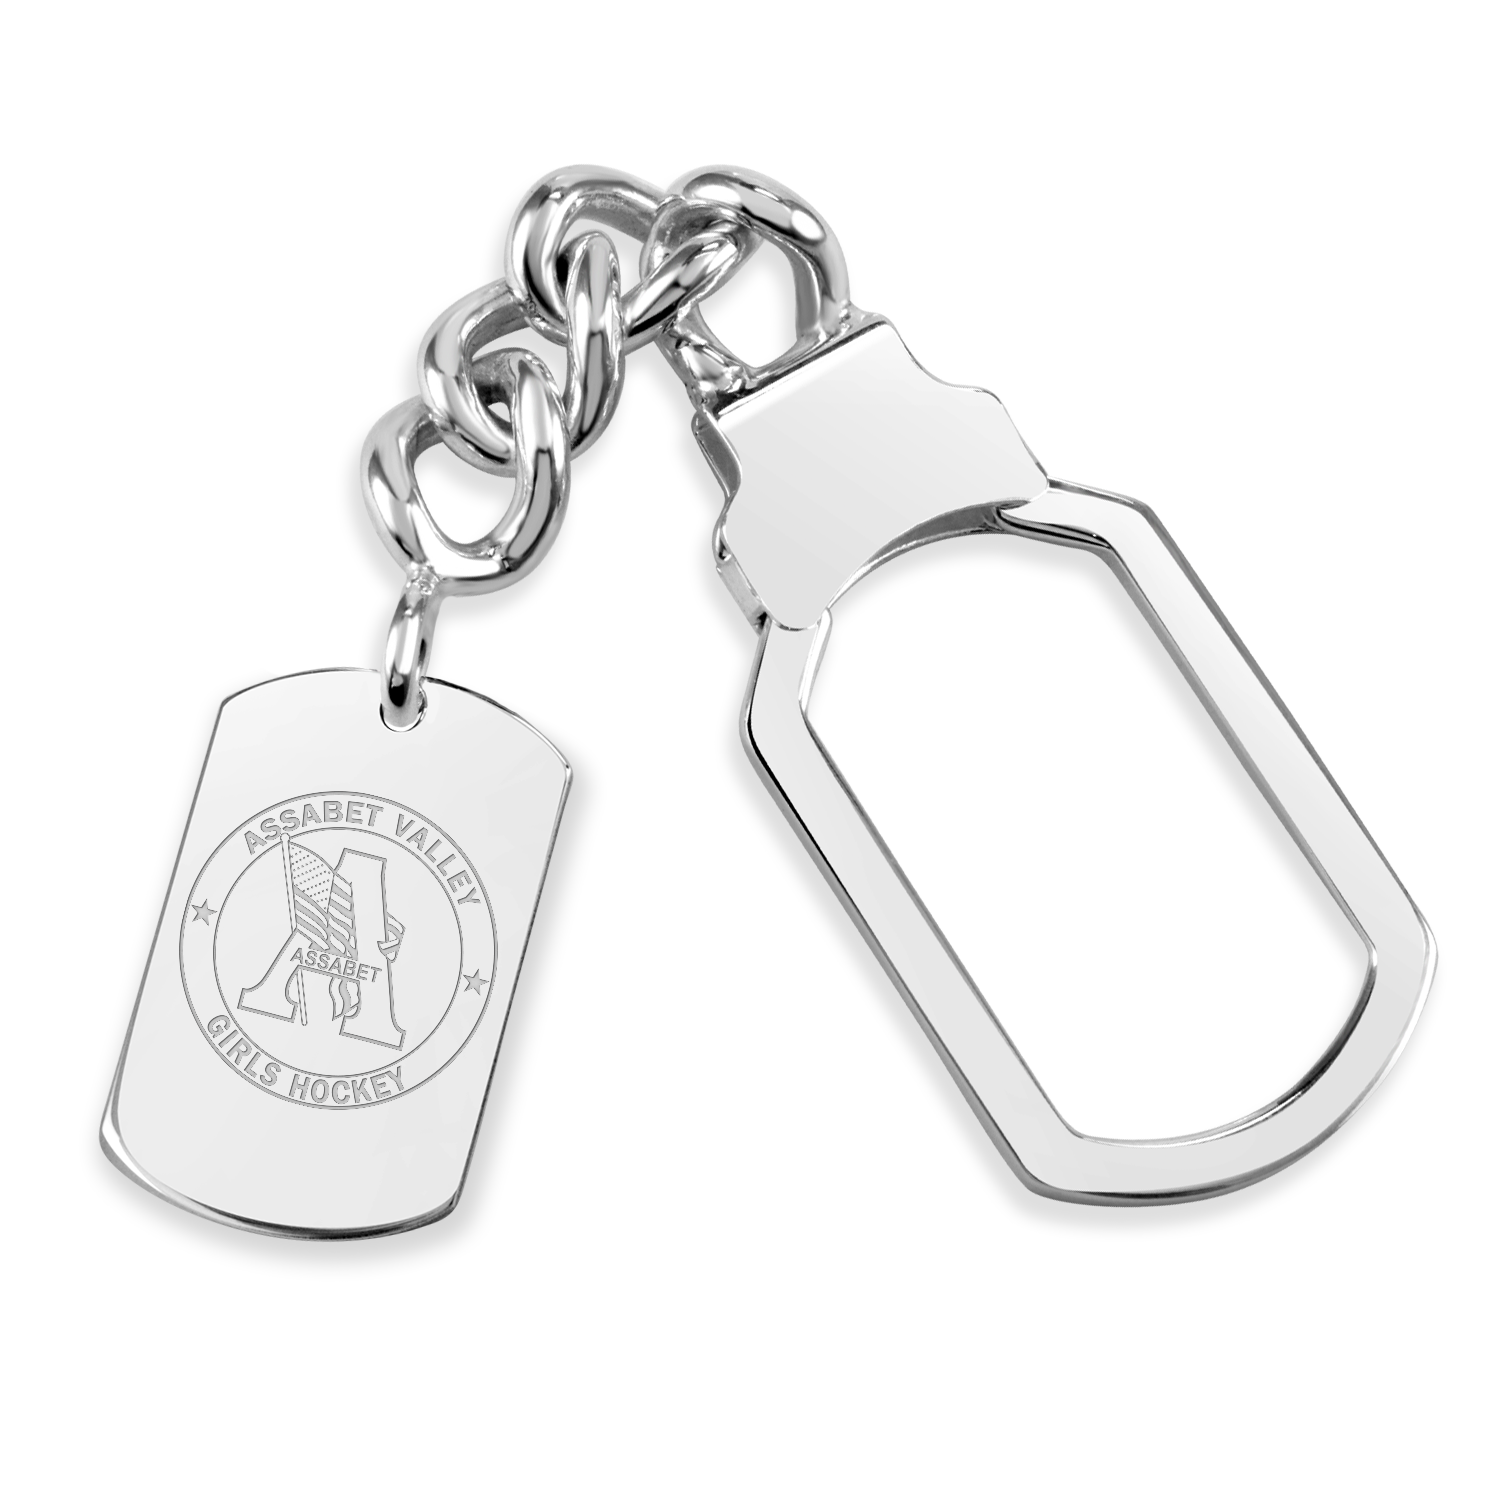 Assabet Valley Tension Lock Key Chain Tag